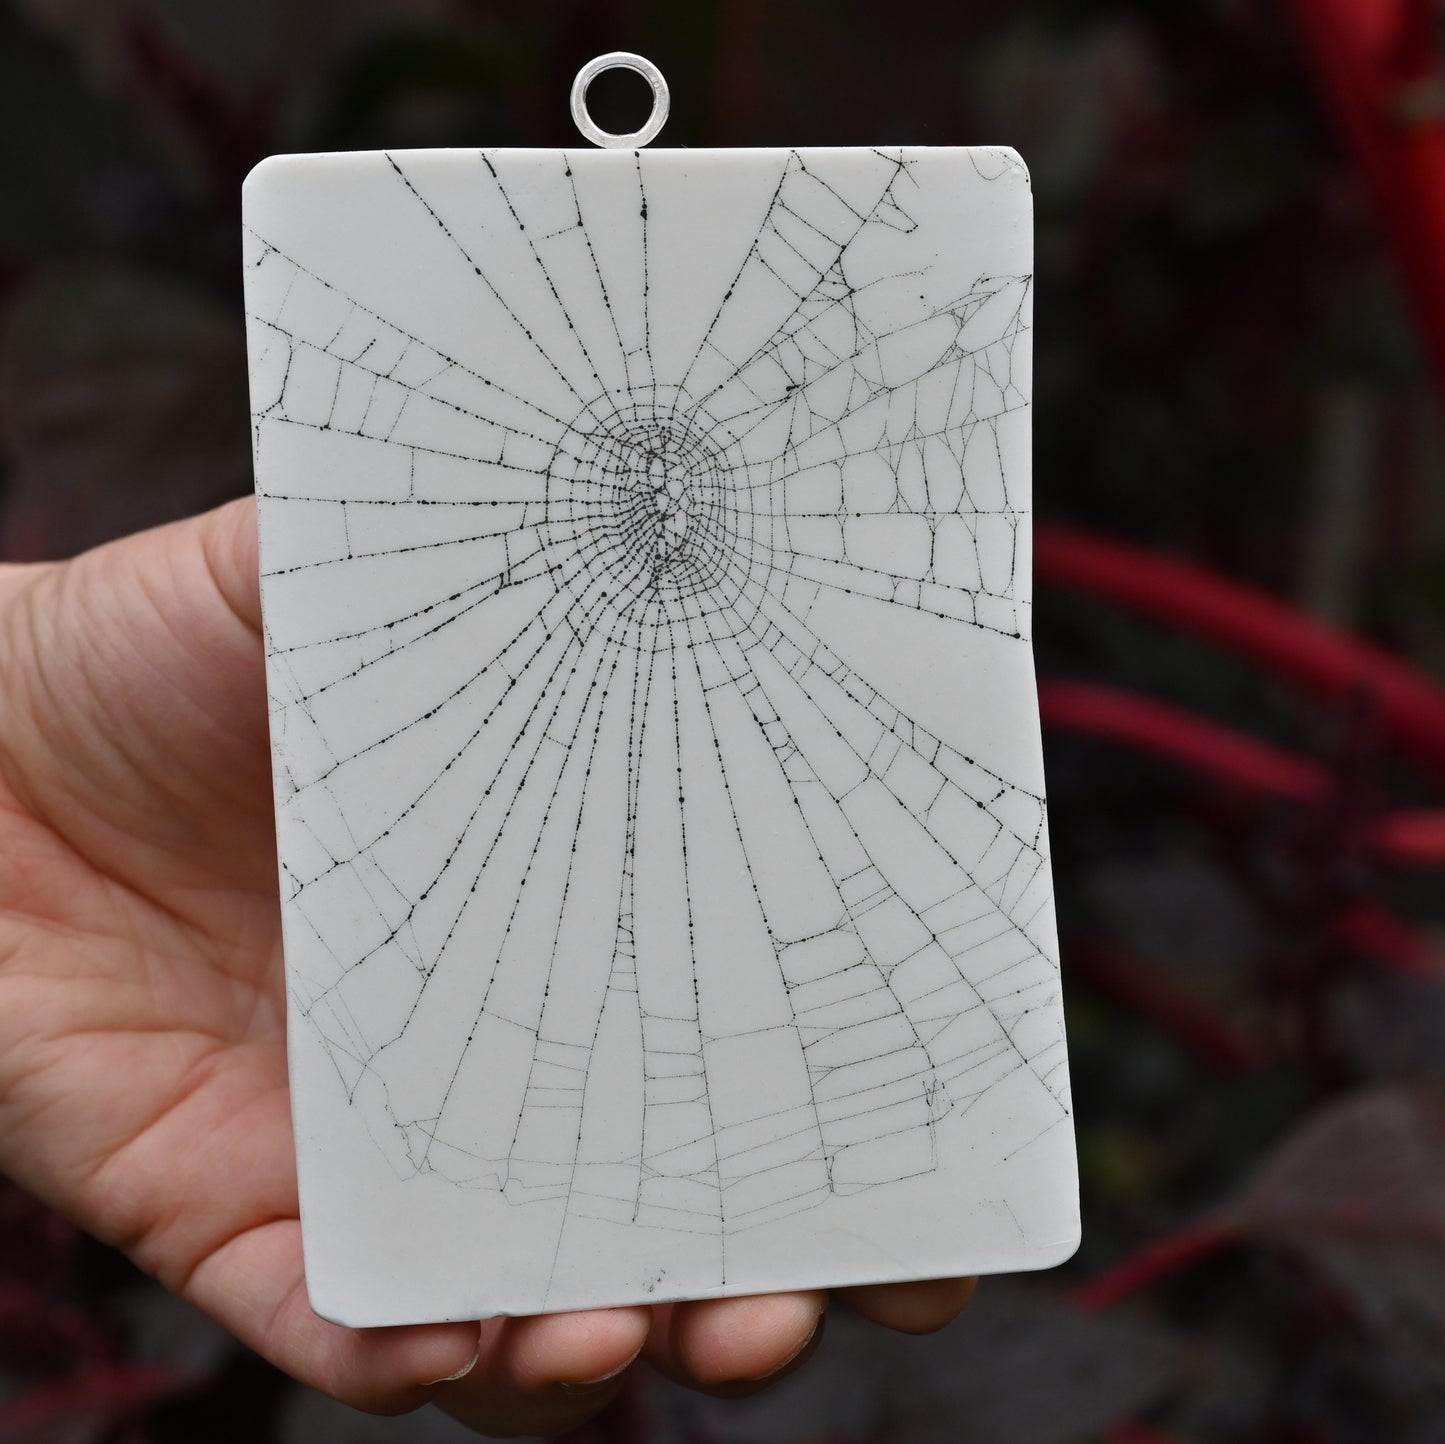 Web on Clay (135), Collected August 31, 2022